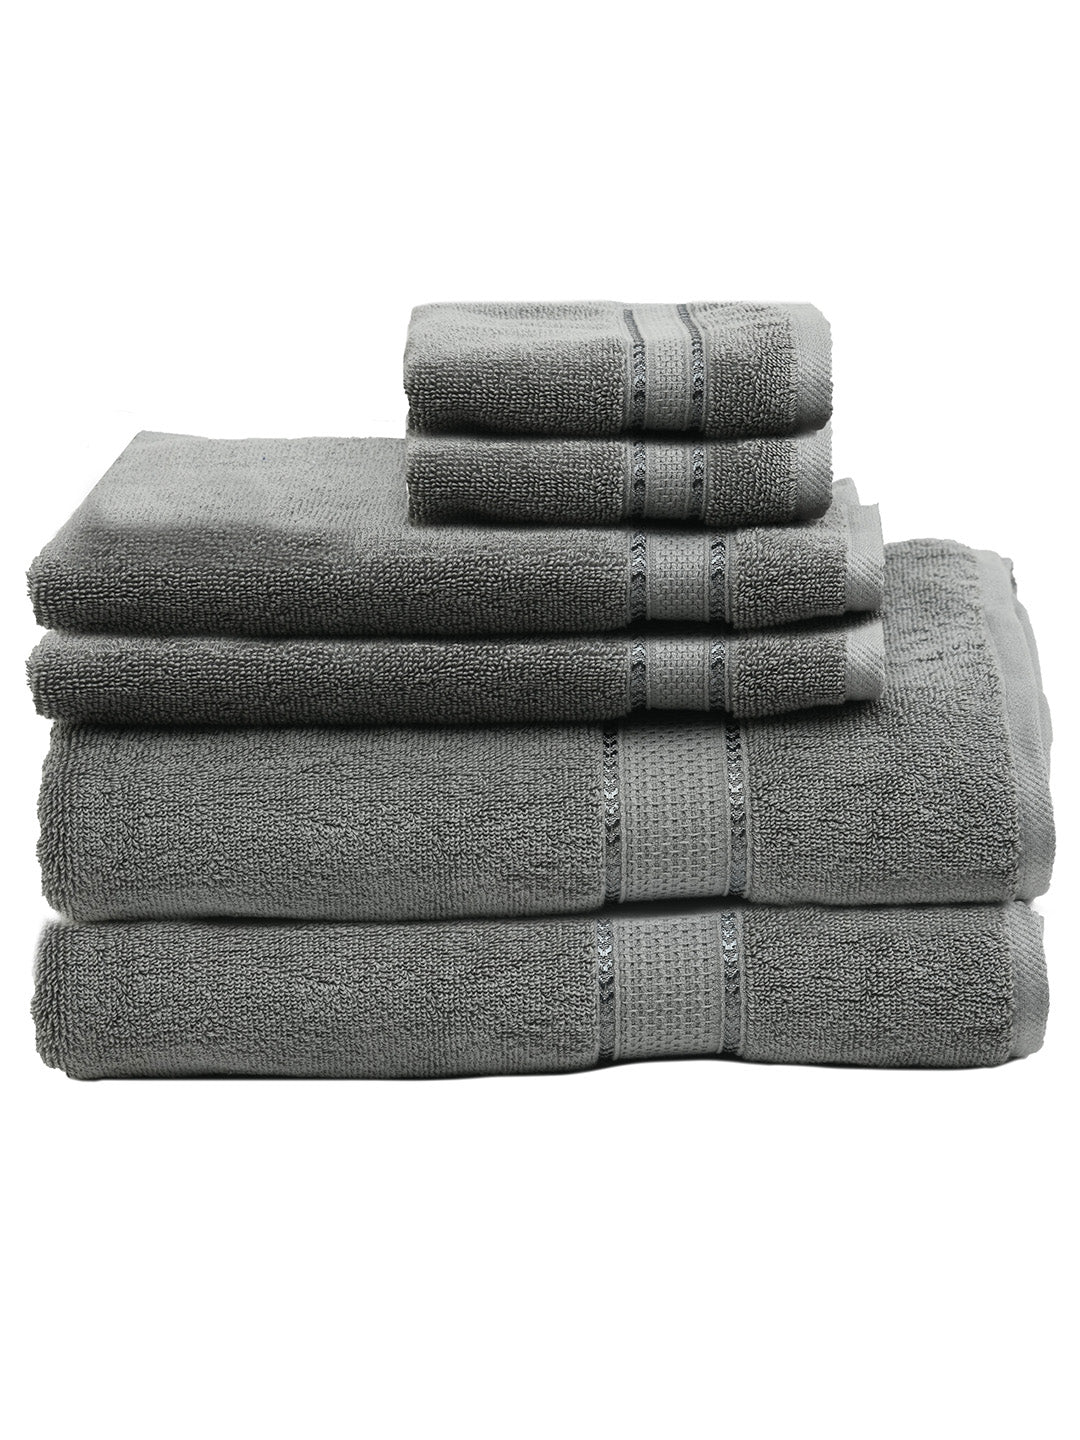 SWHF Chic Home Casual Bath, Hand and Washcloth Terry Grey Towel- Set of 6